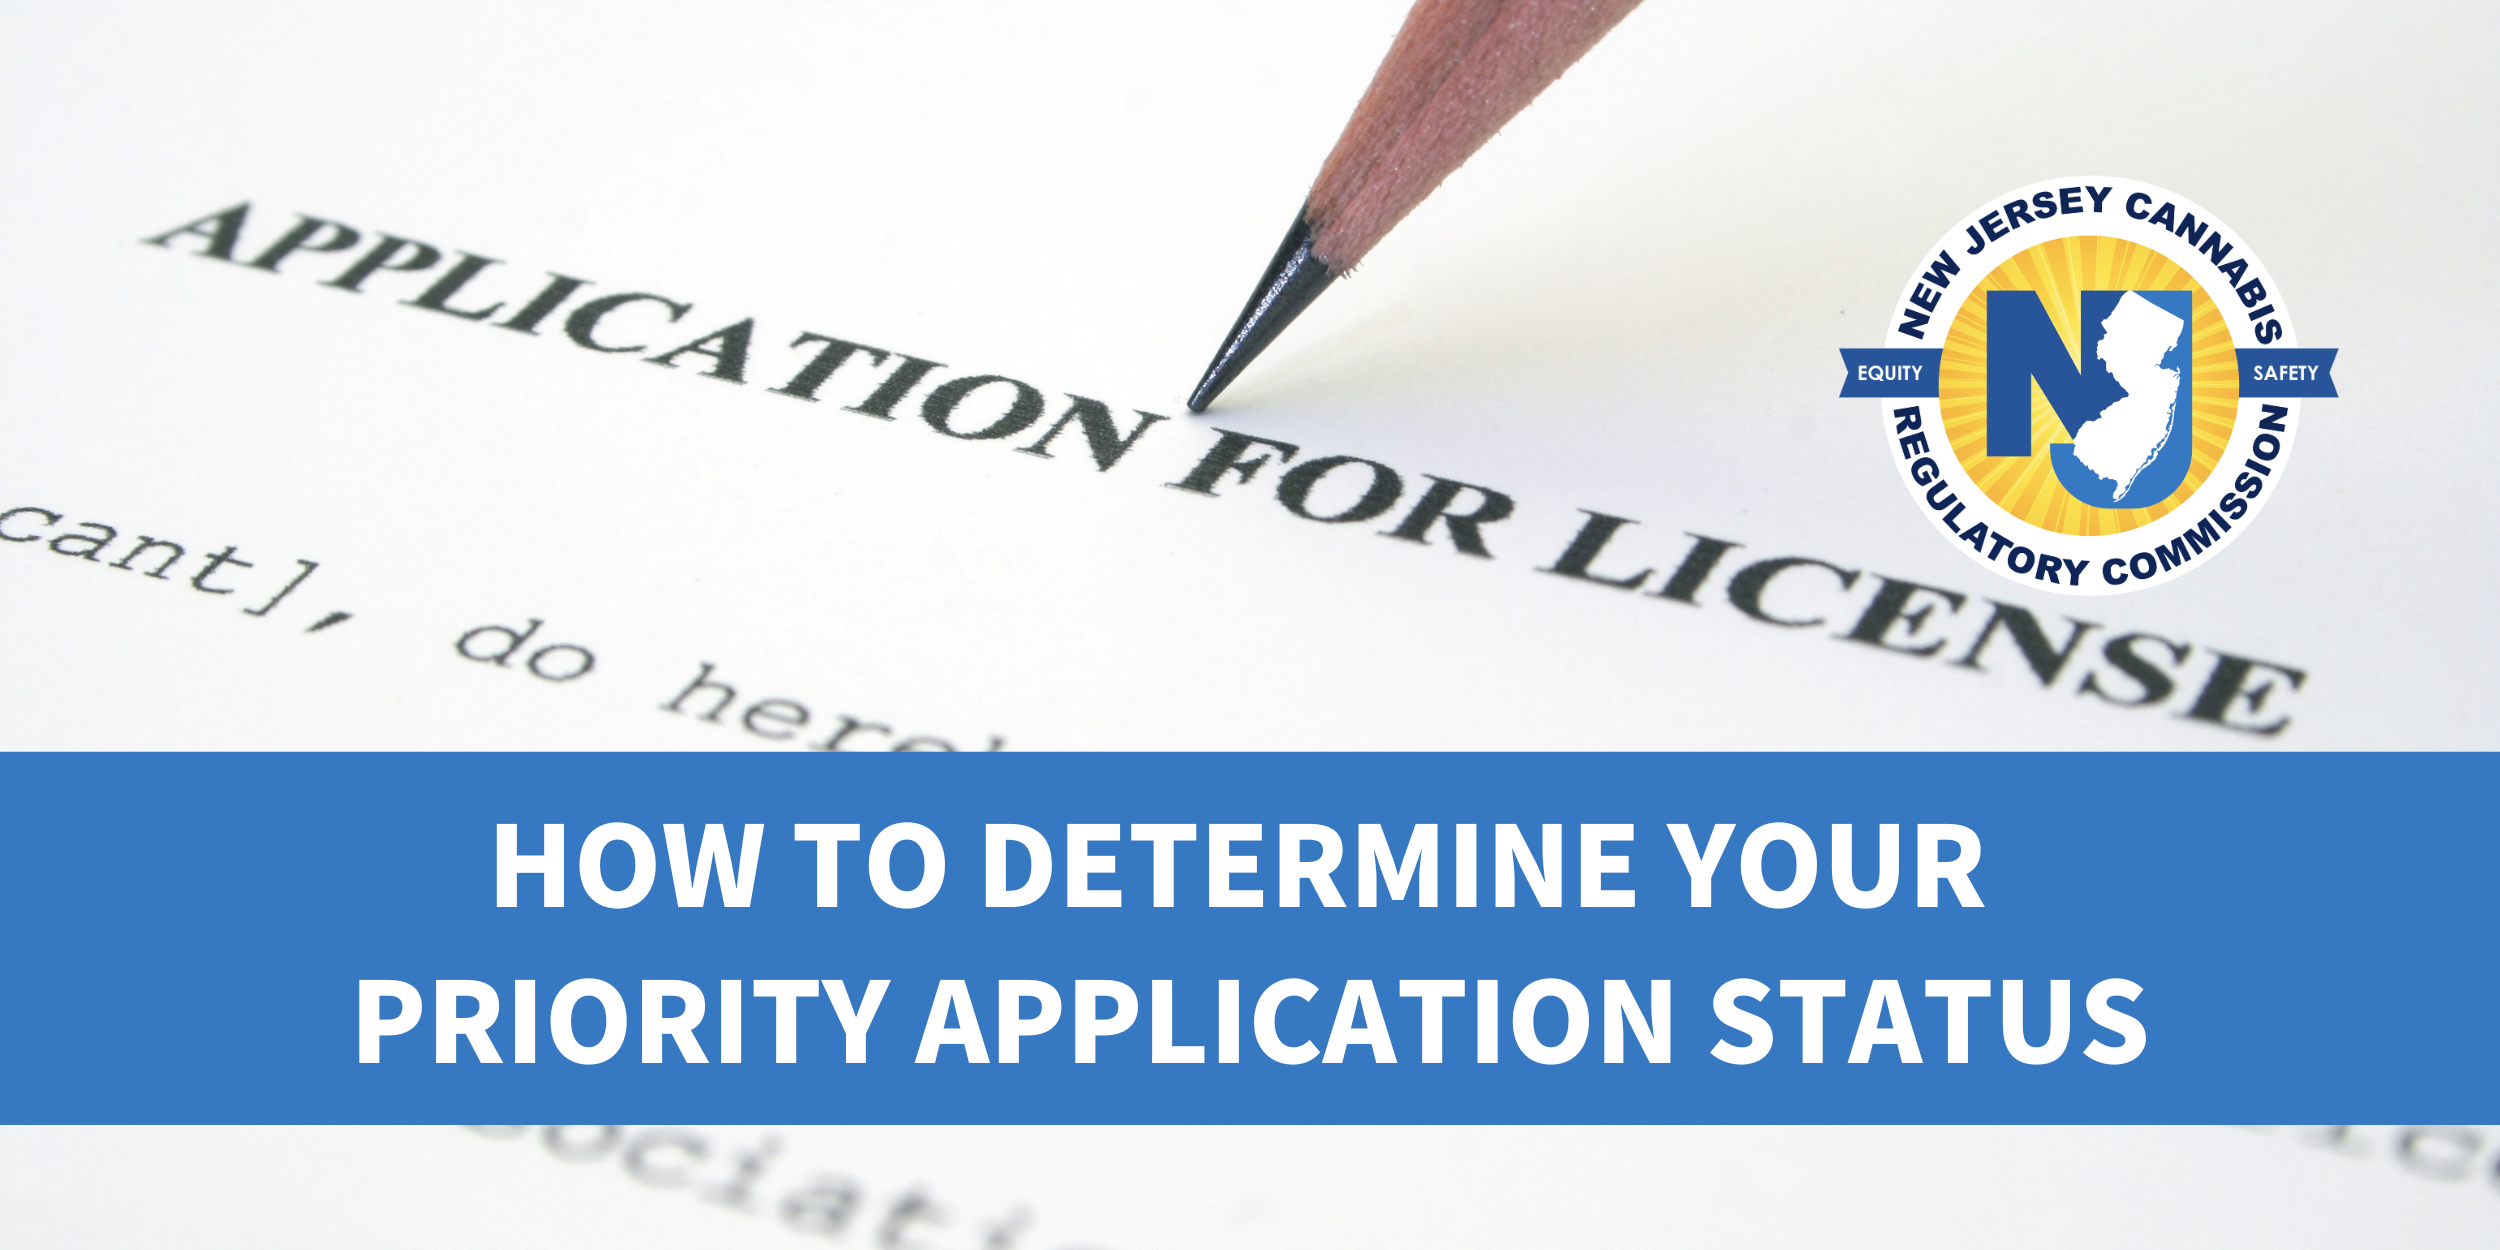 How to Determine Your Priority Application Status